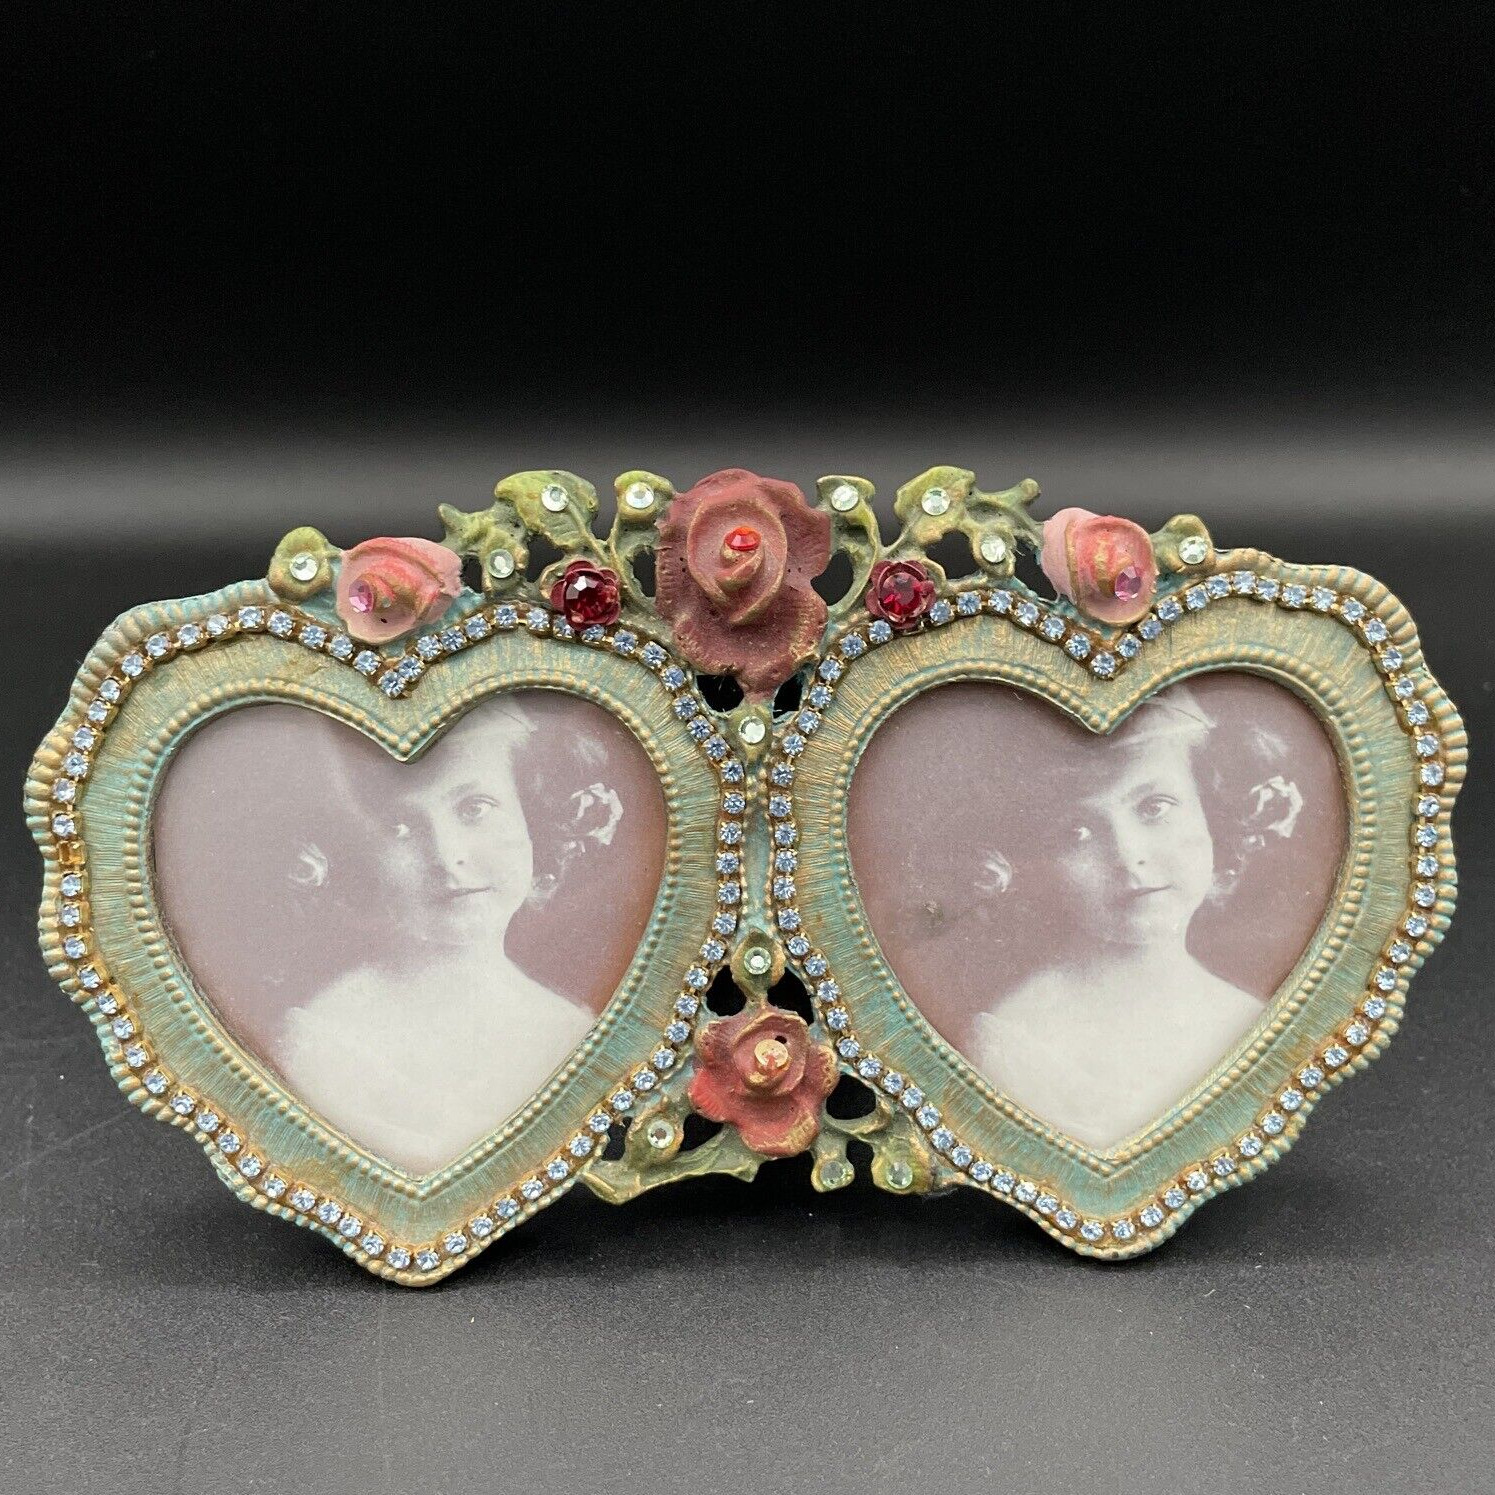 Vintage Metal & Rhinestone Duo Hearts & Roses Michal Negrin Picture Frame